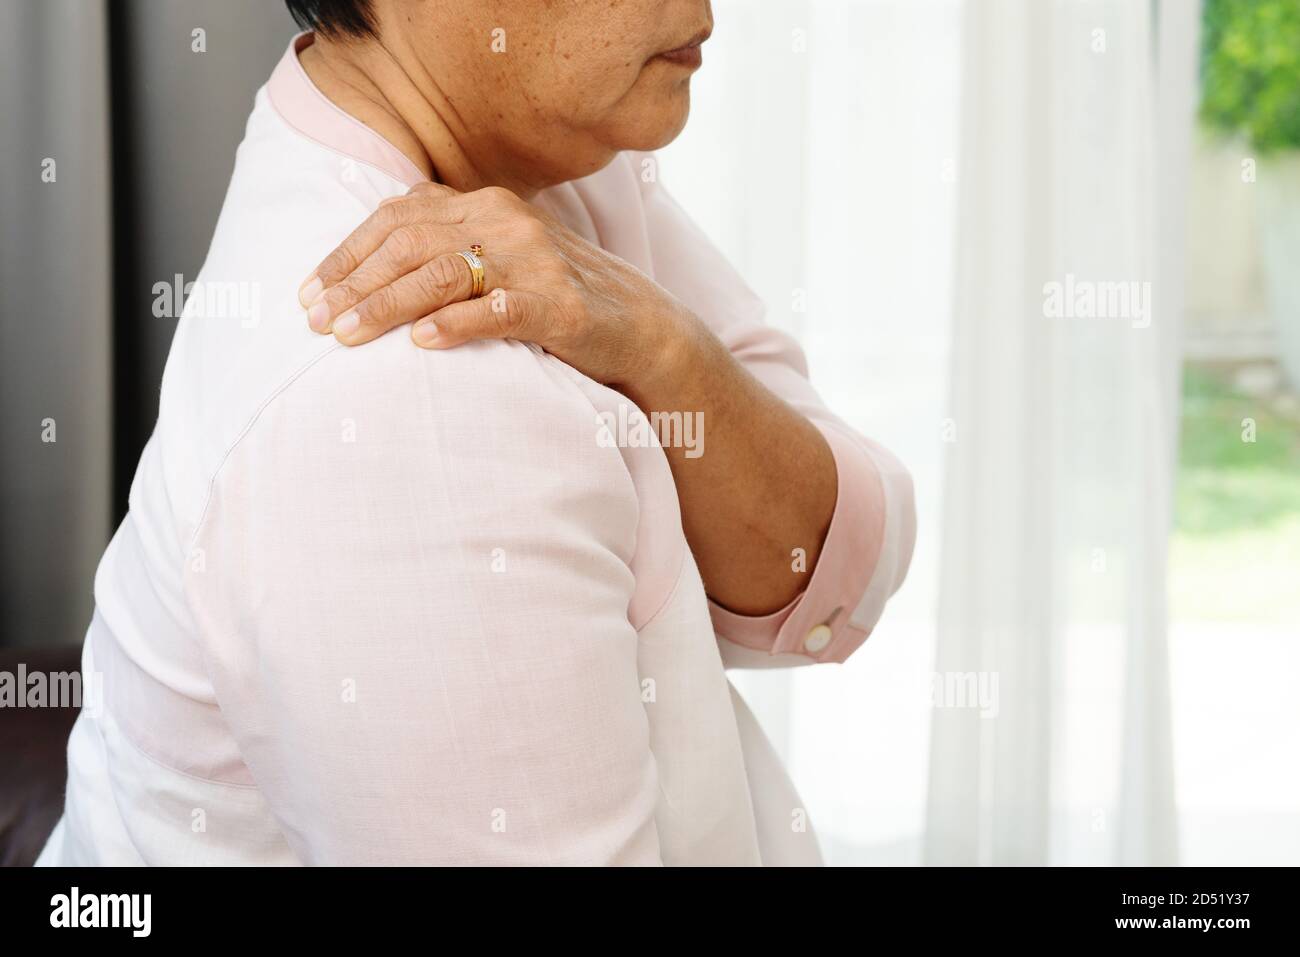 neck and shoulder pain, old woman suffering from neck and shoulder injury, health problem concept Stock Photo